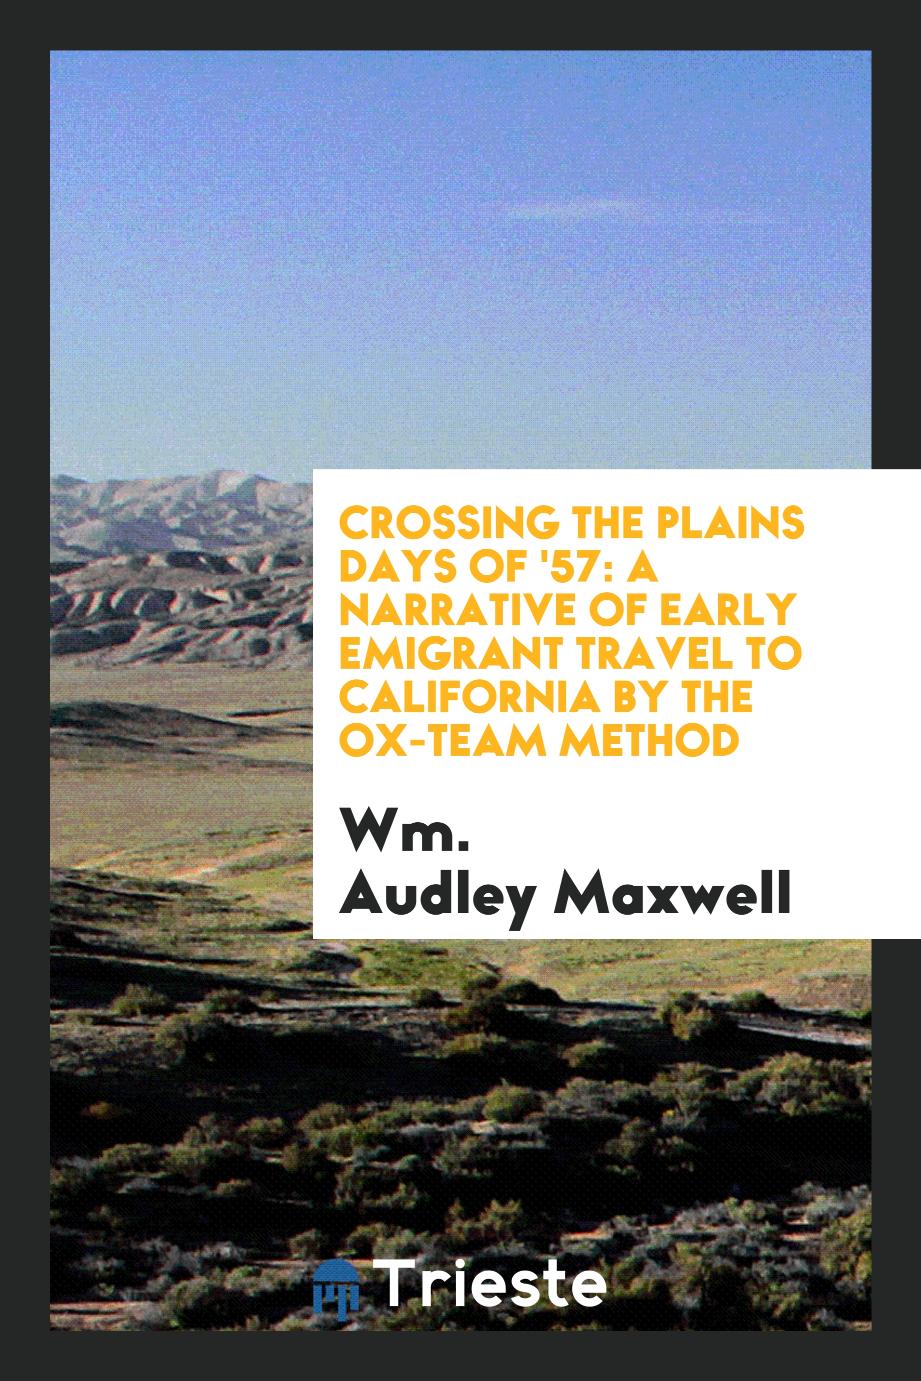 Crossing the Plains Days of '57: A Narrative of Early Emigrant Travel to California by the Ox-Team Method